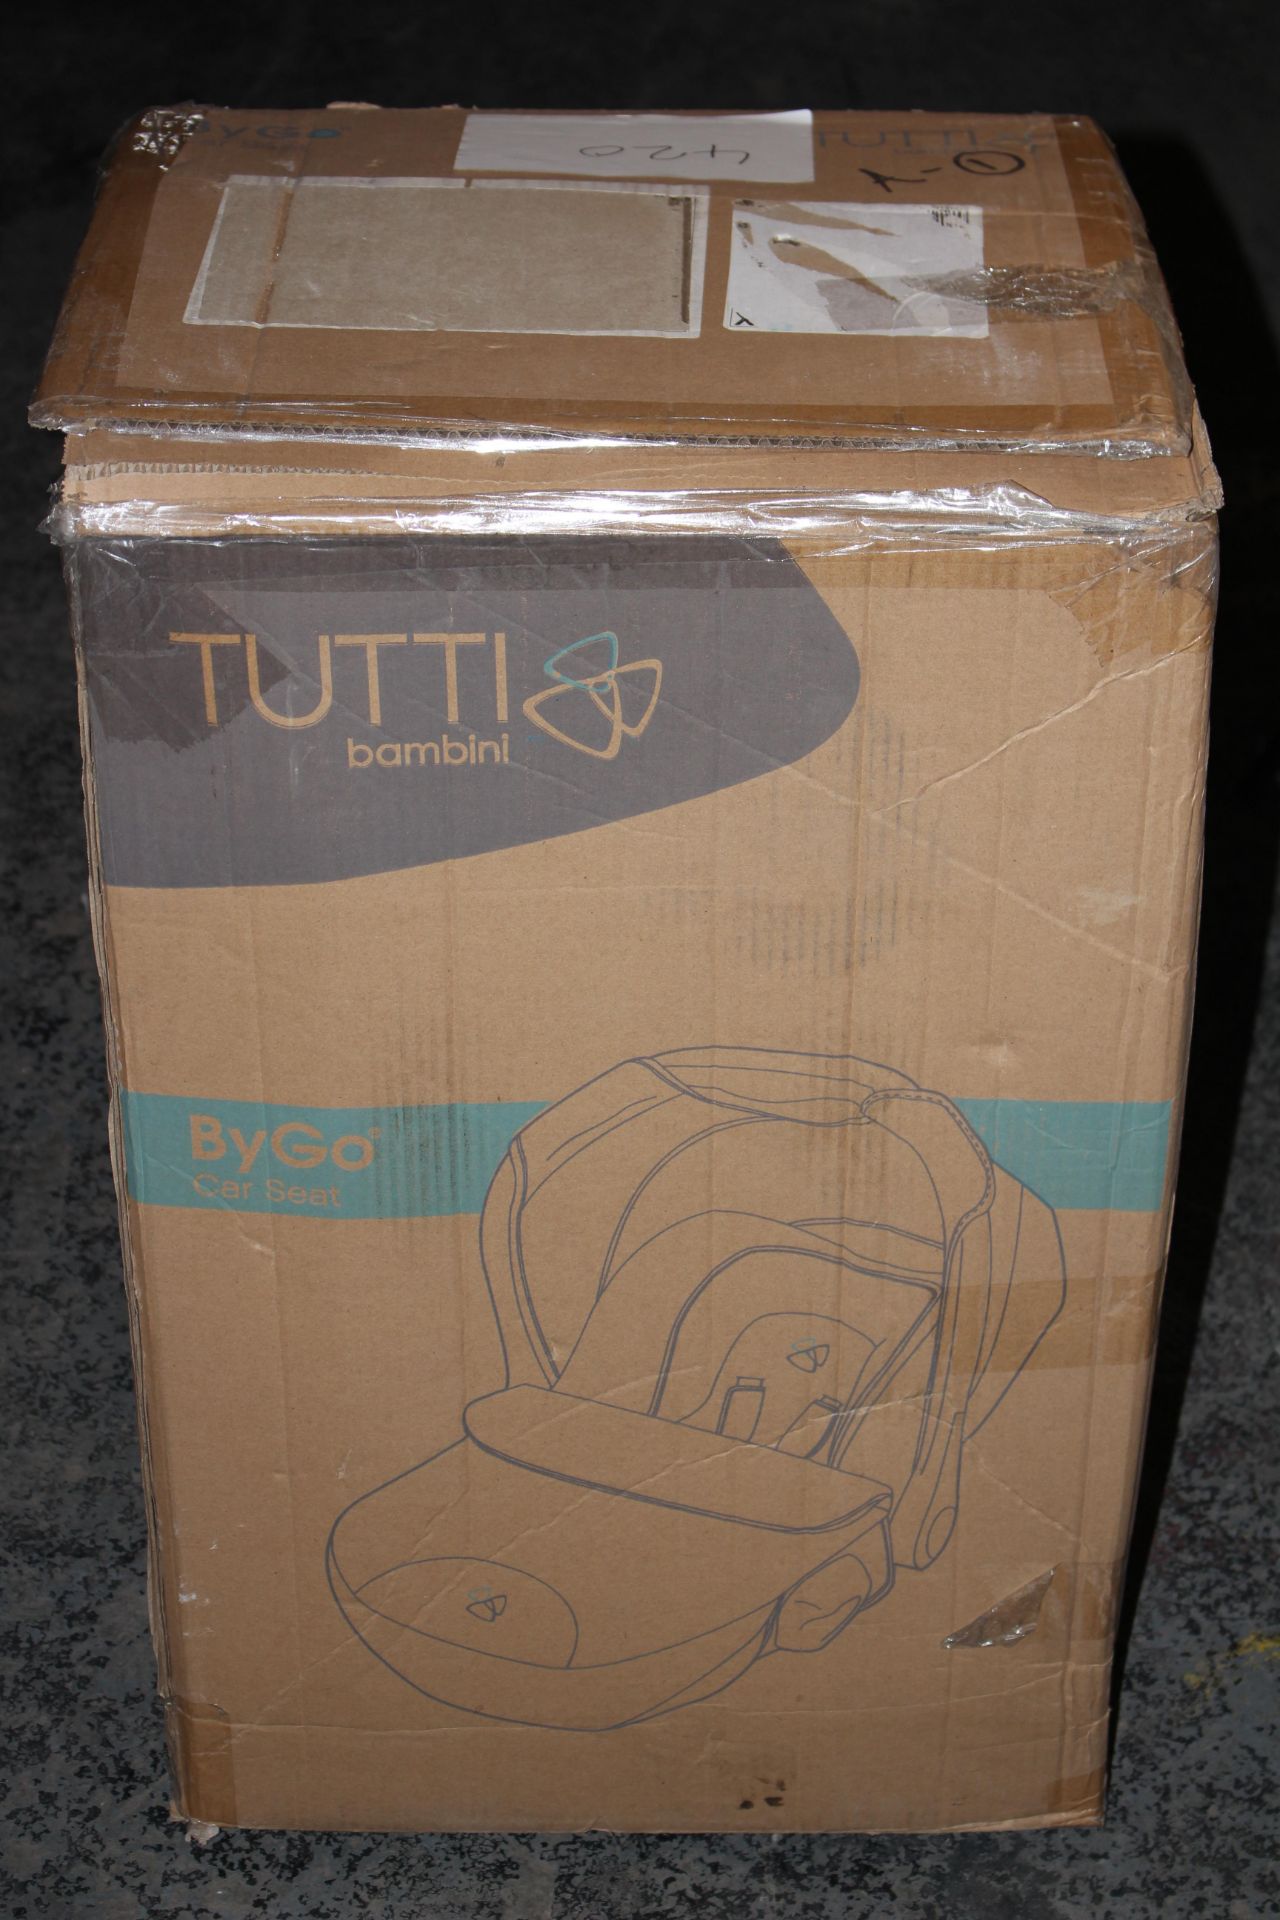 BOXED TUTTI BAMBINI BYGO CAR SEAT RRP £110.00Condition ReportAppraisal Available on Request- All